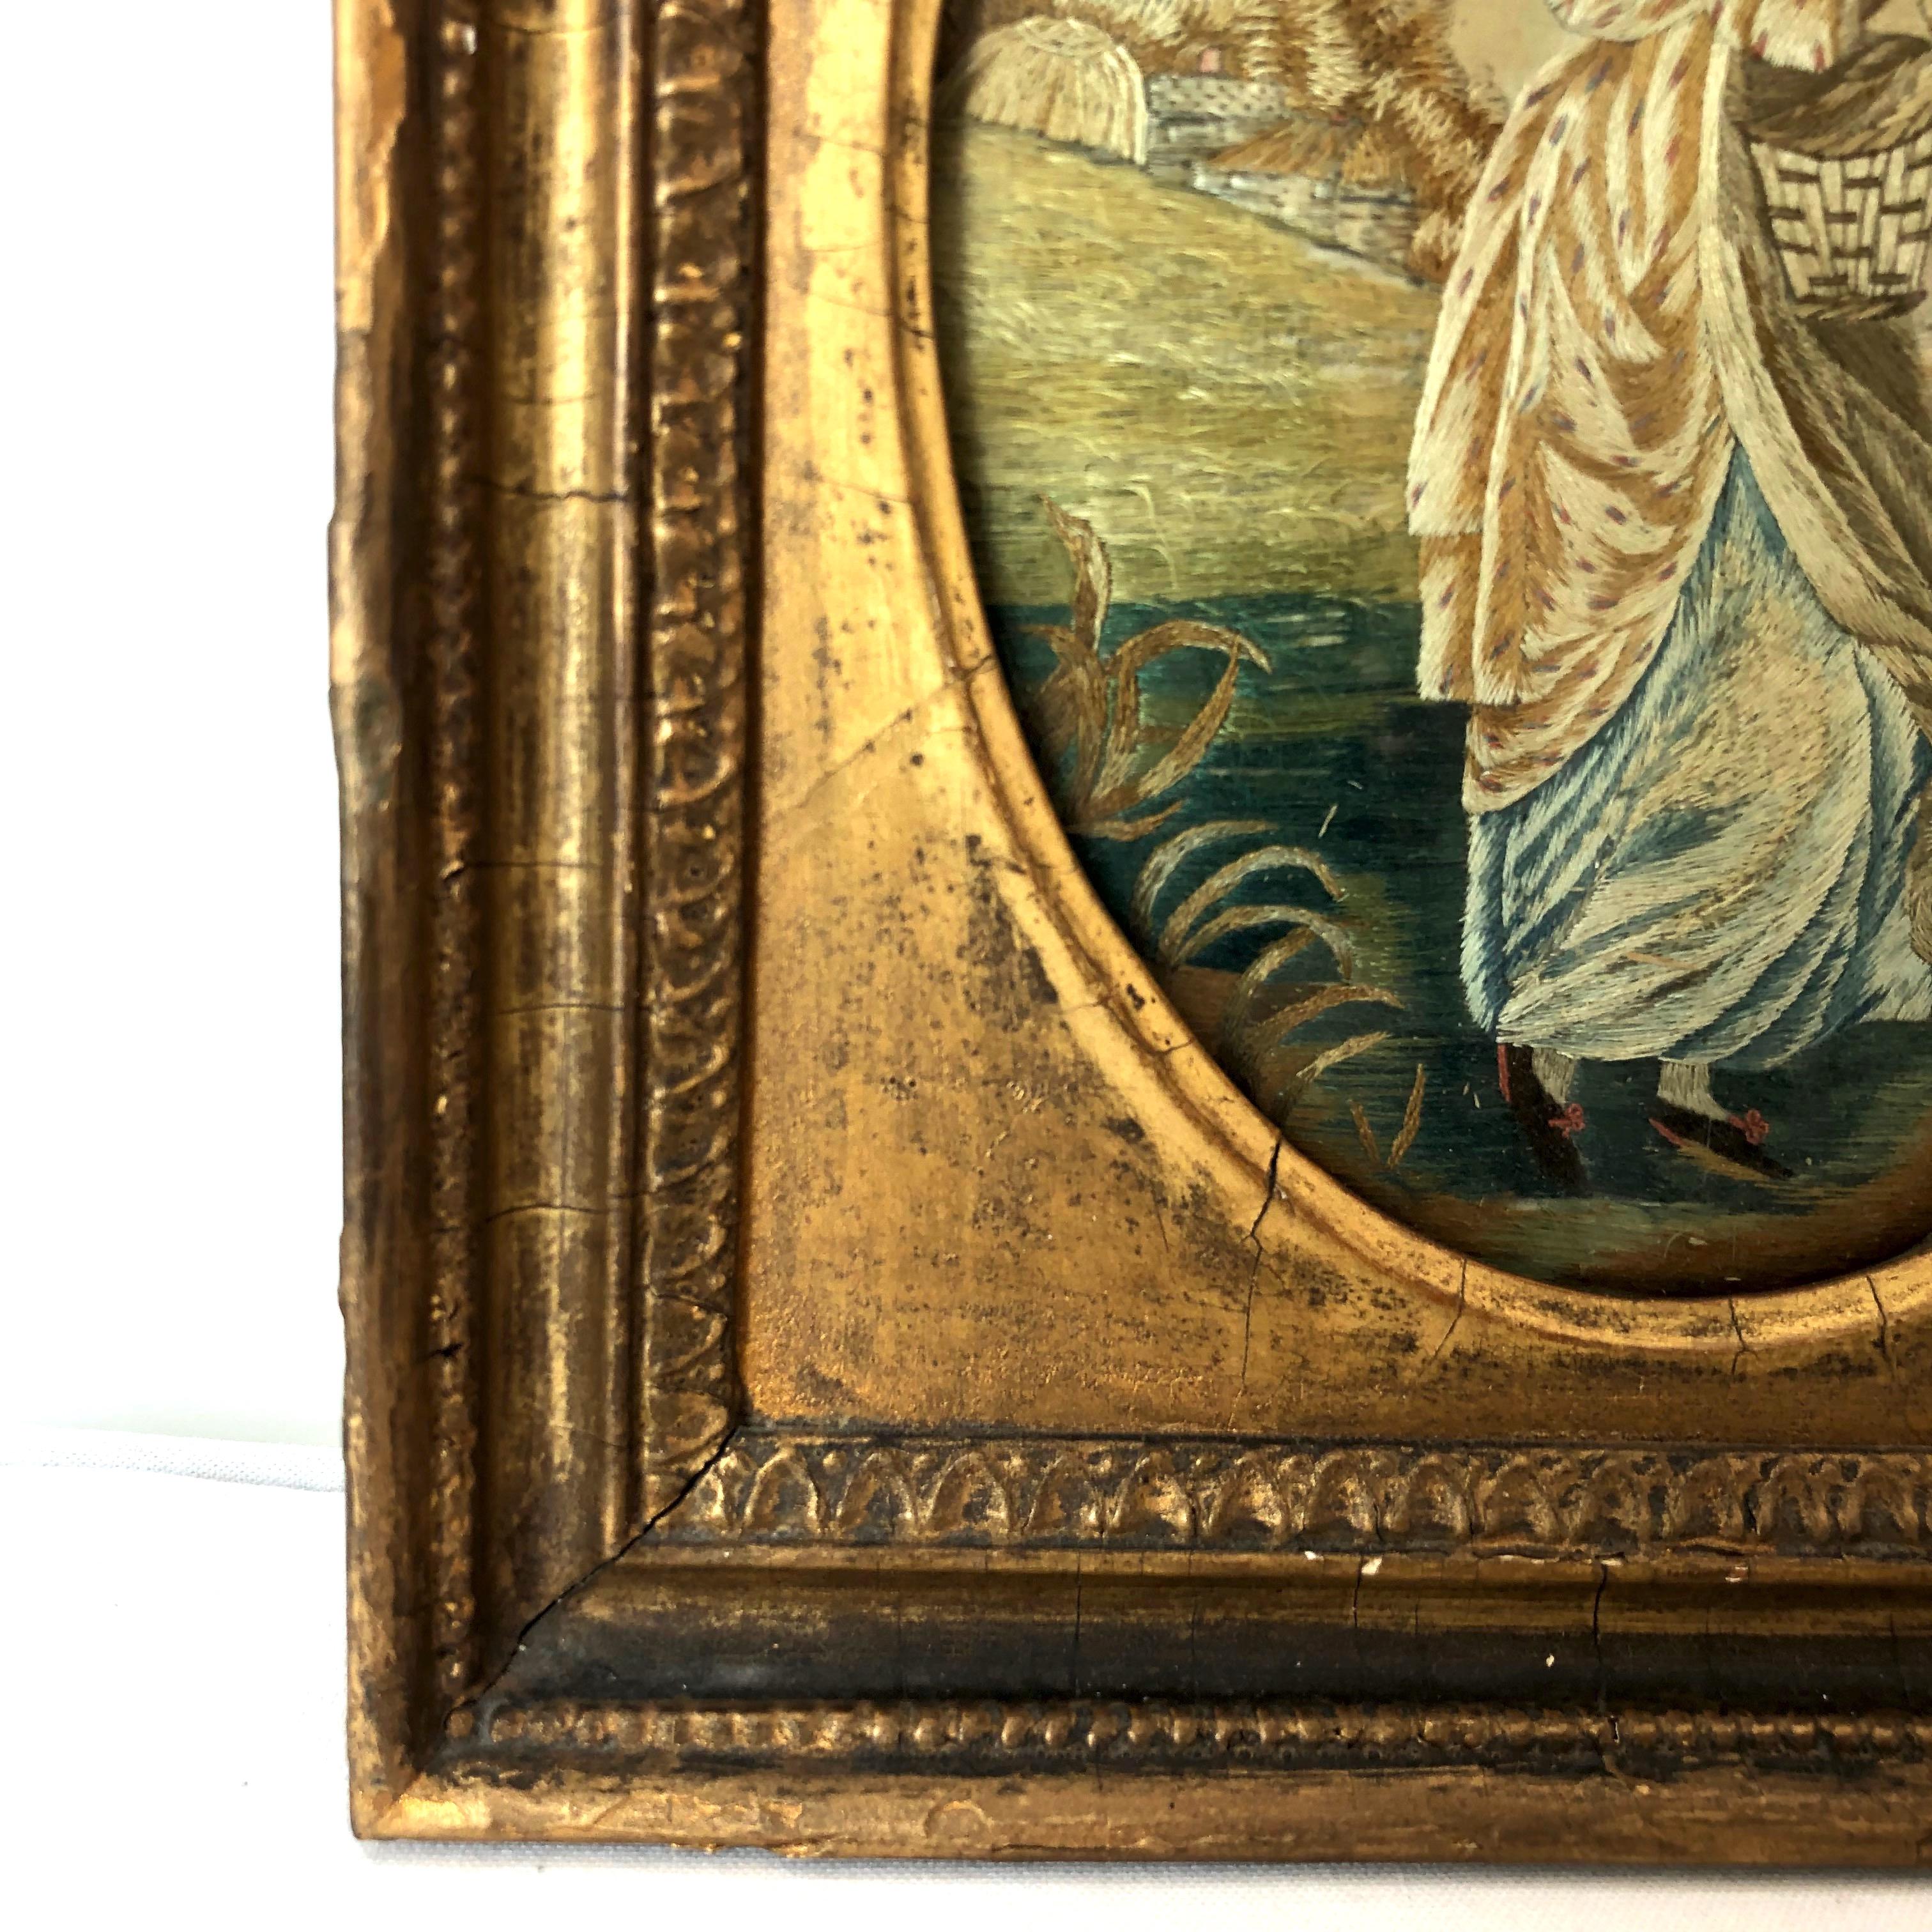 First quarter of the 19th century oval antique framed silk embroidery of woman with rake,
circa 1800-1820. Original frame.